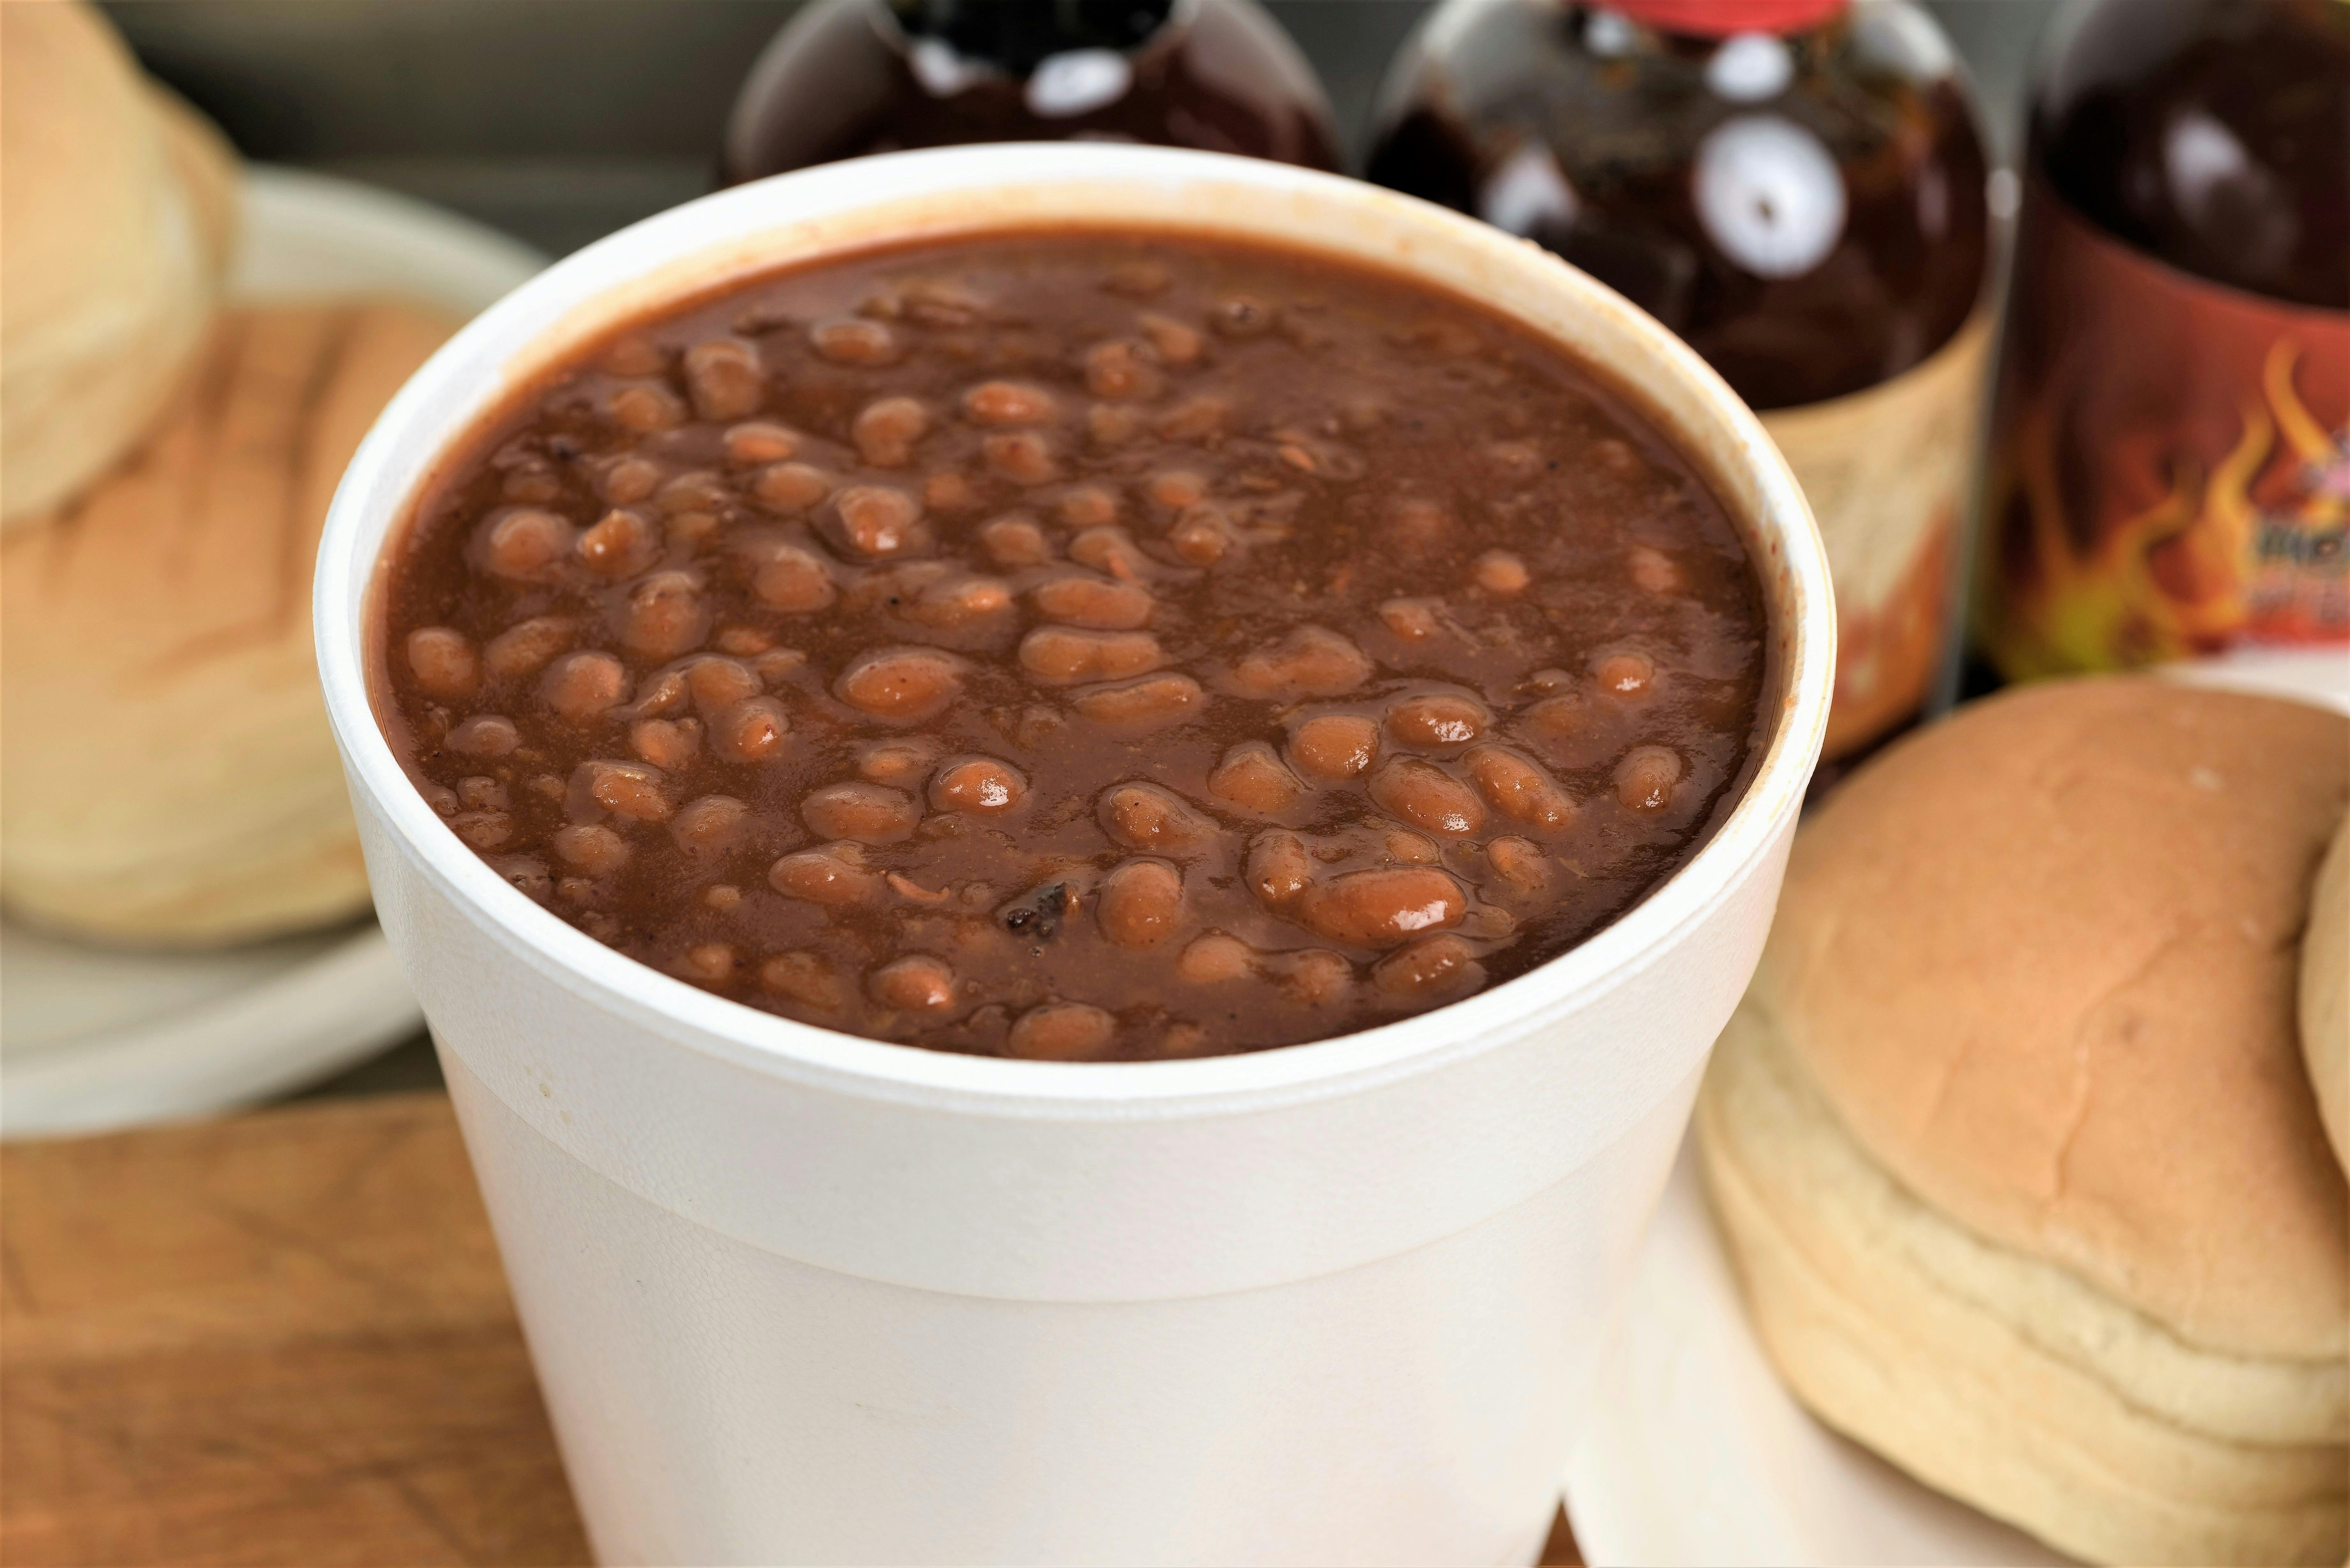 Baked Beans from Hog Wild Pit BBQ & Catering in Lawrence, KS